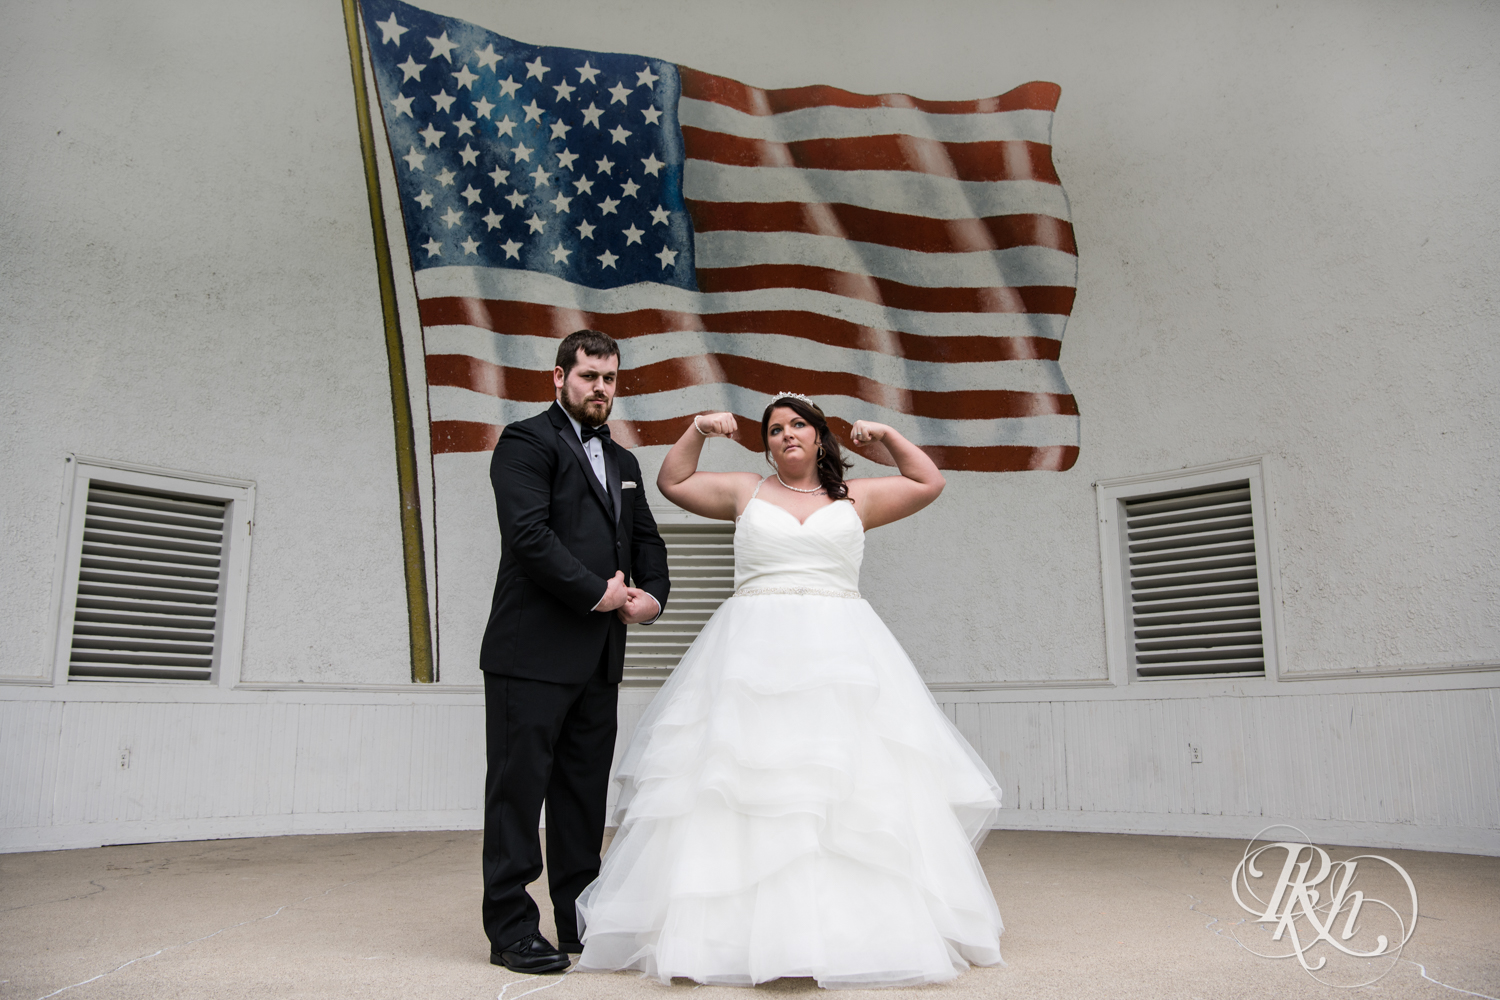 Bride and groom pose in front of American flag mural in Port Washington, Wisconsin